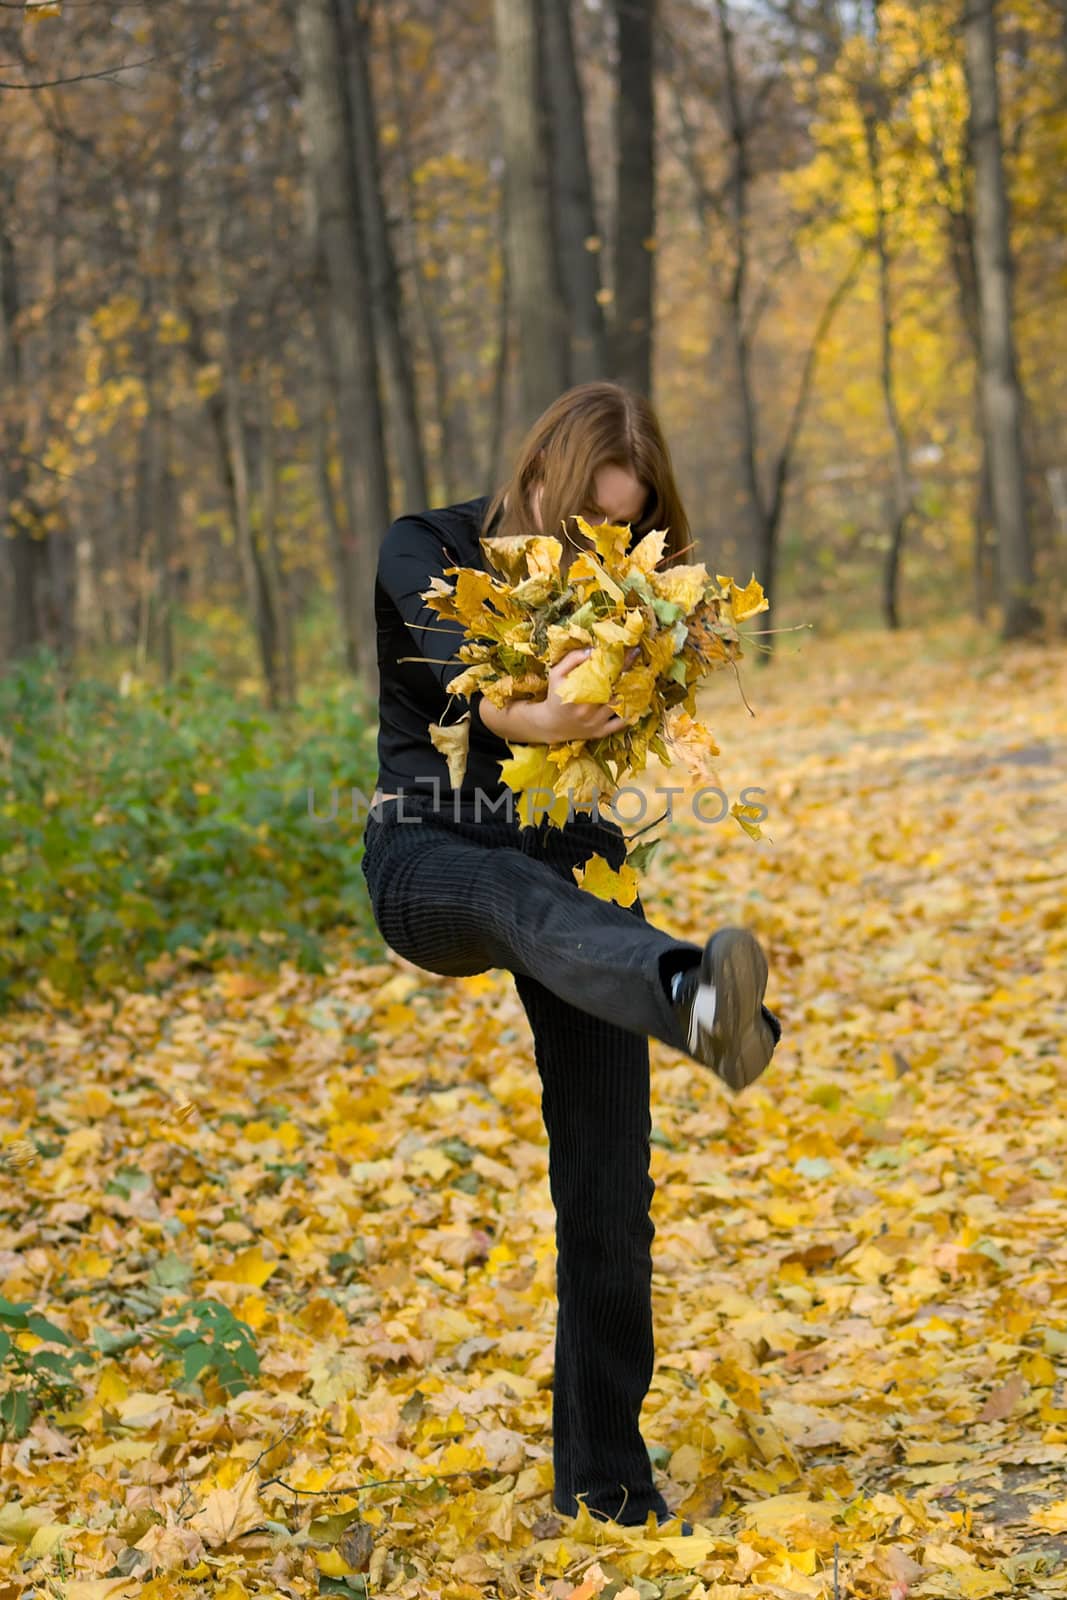 The young girl against autumn nature